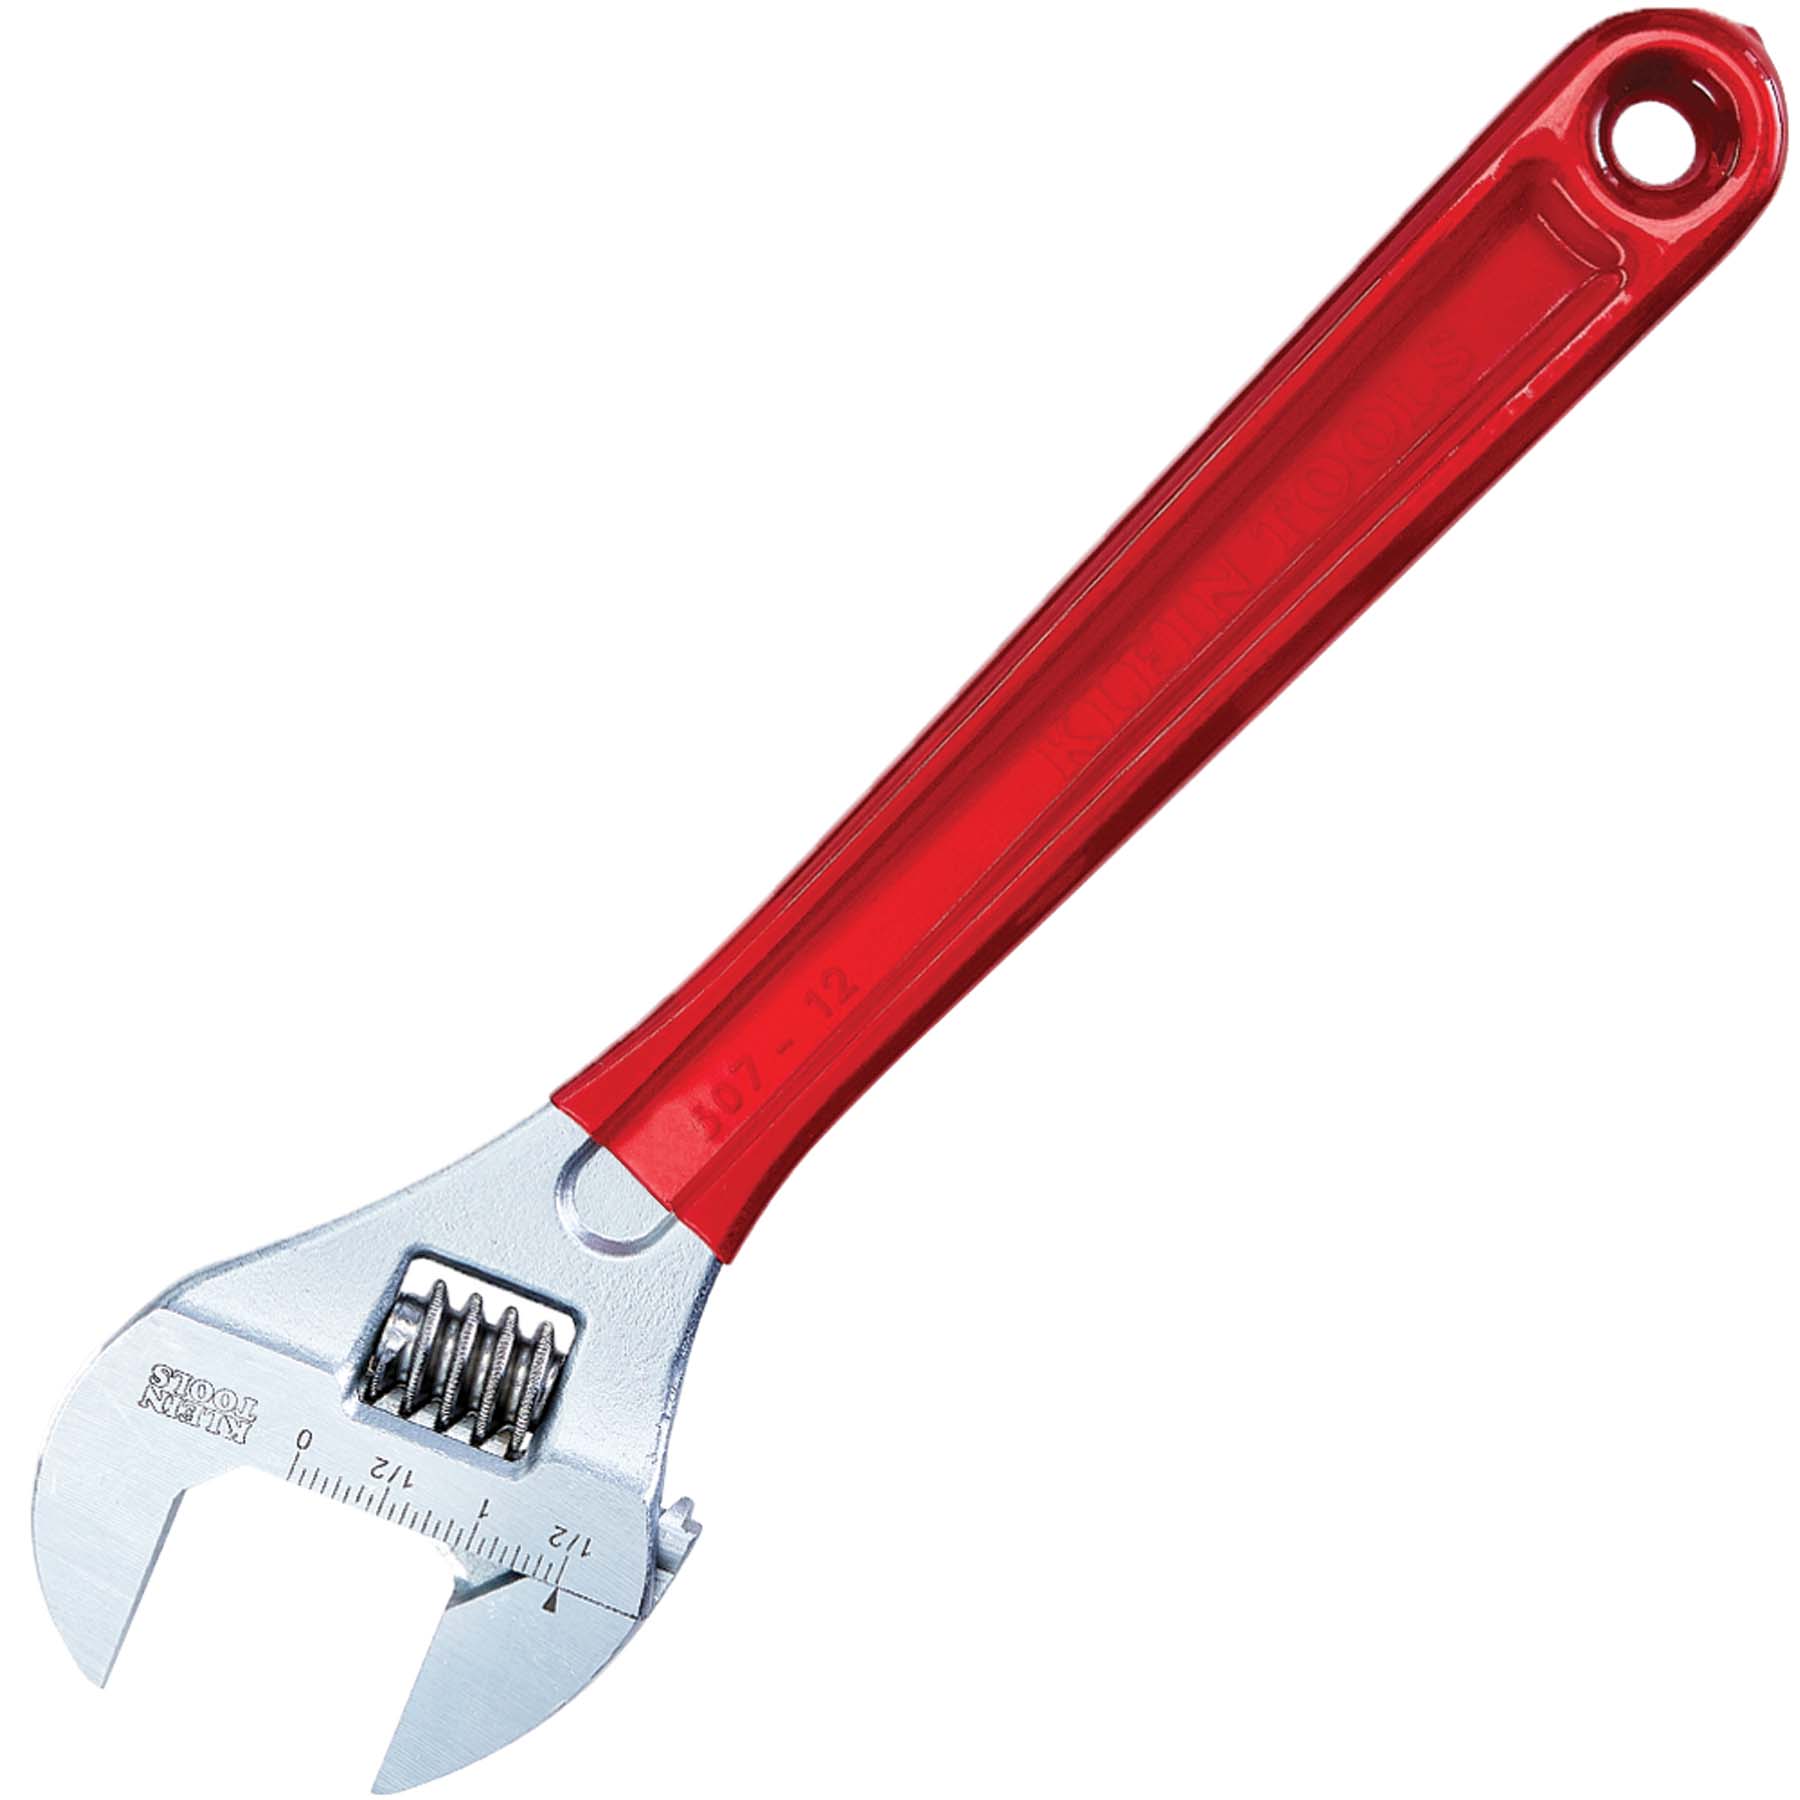 12' ADJUSTABLE WRENCH EXTRA CAPACITY